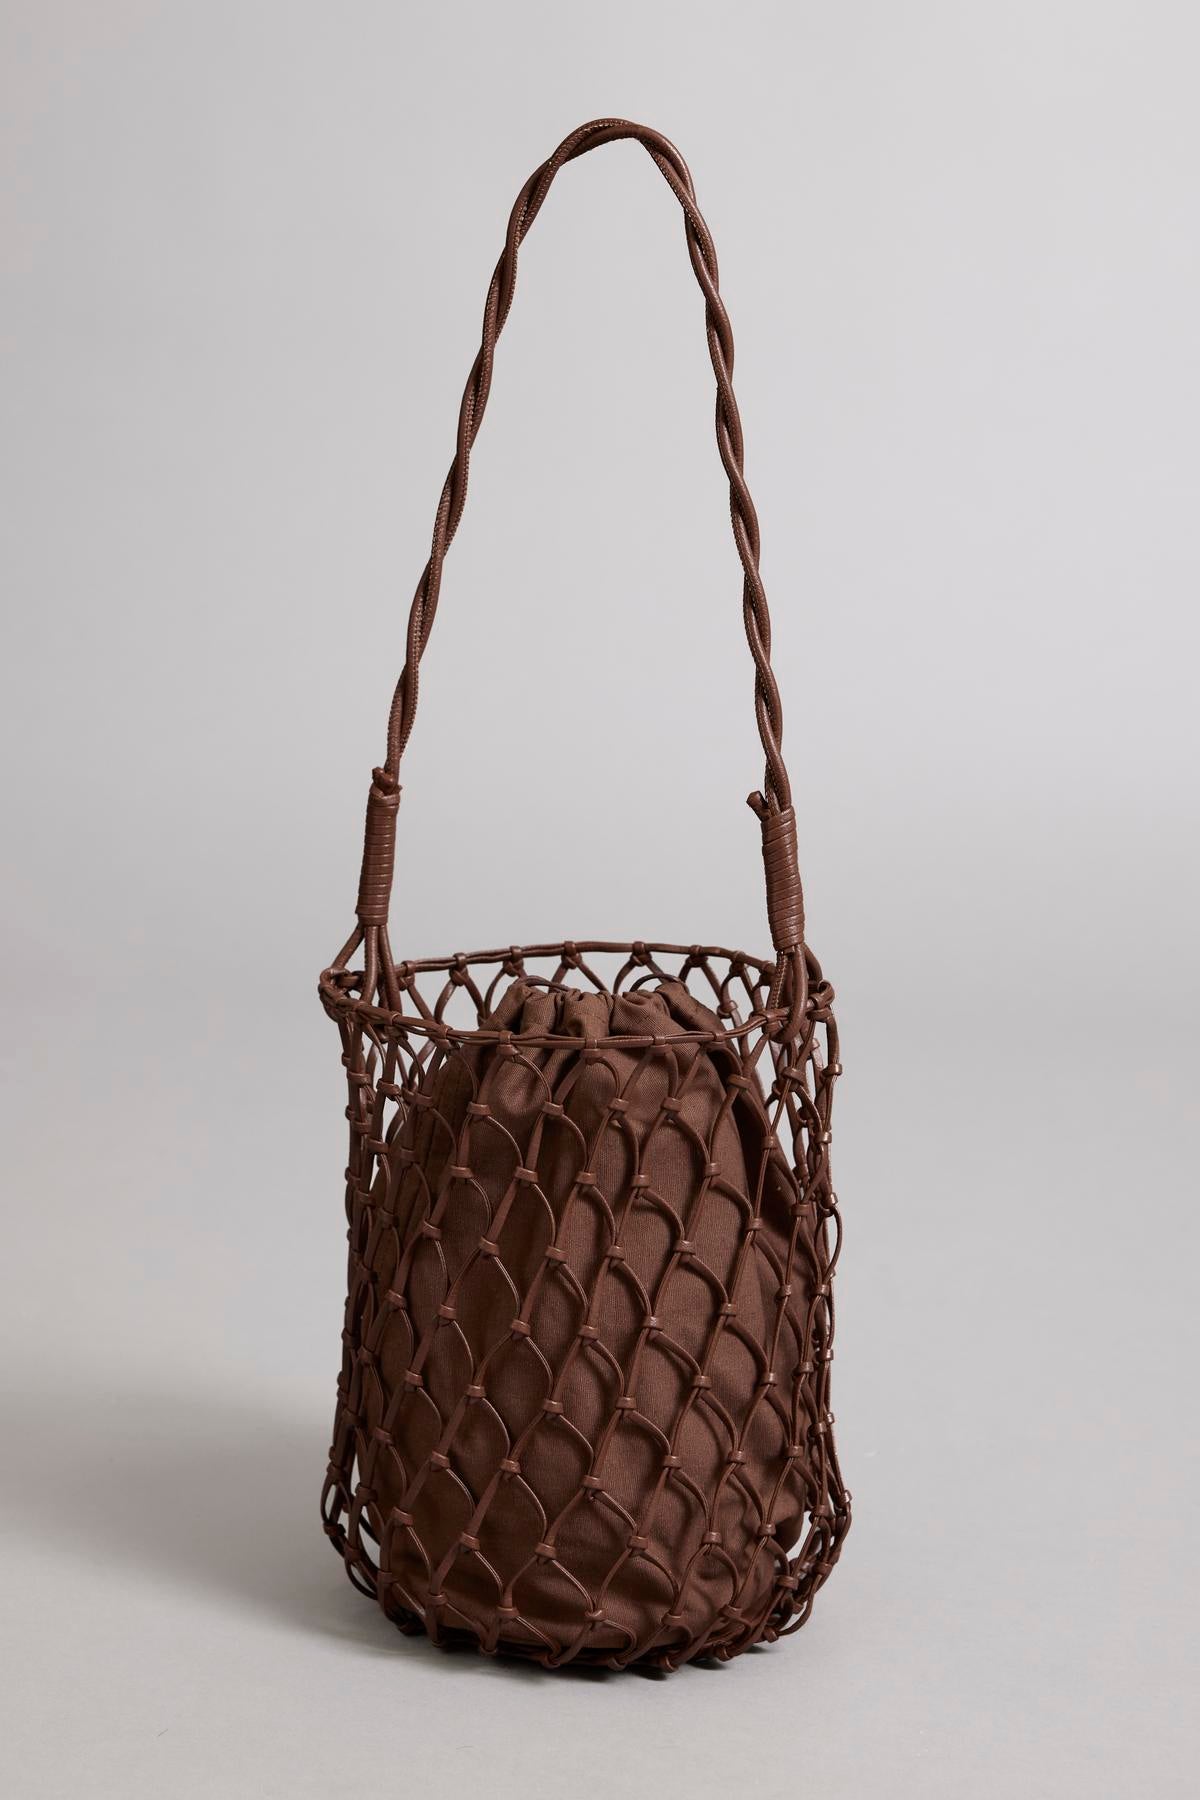   Brown vegan leather Velvet by Graham & Spencer mesh tote bag with a long braided handle on a neutral background. 